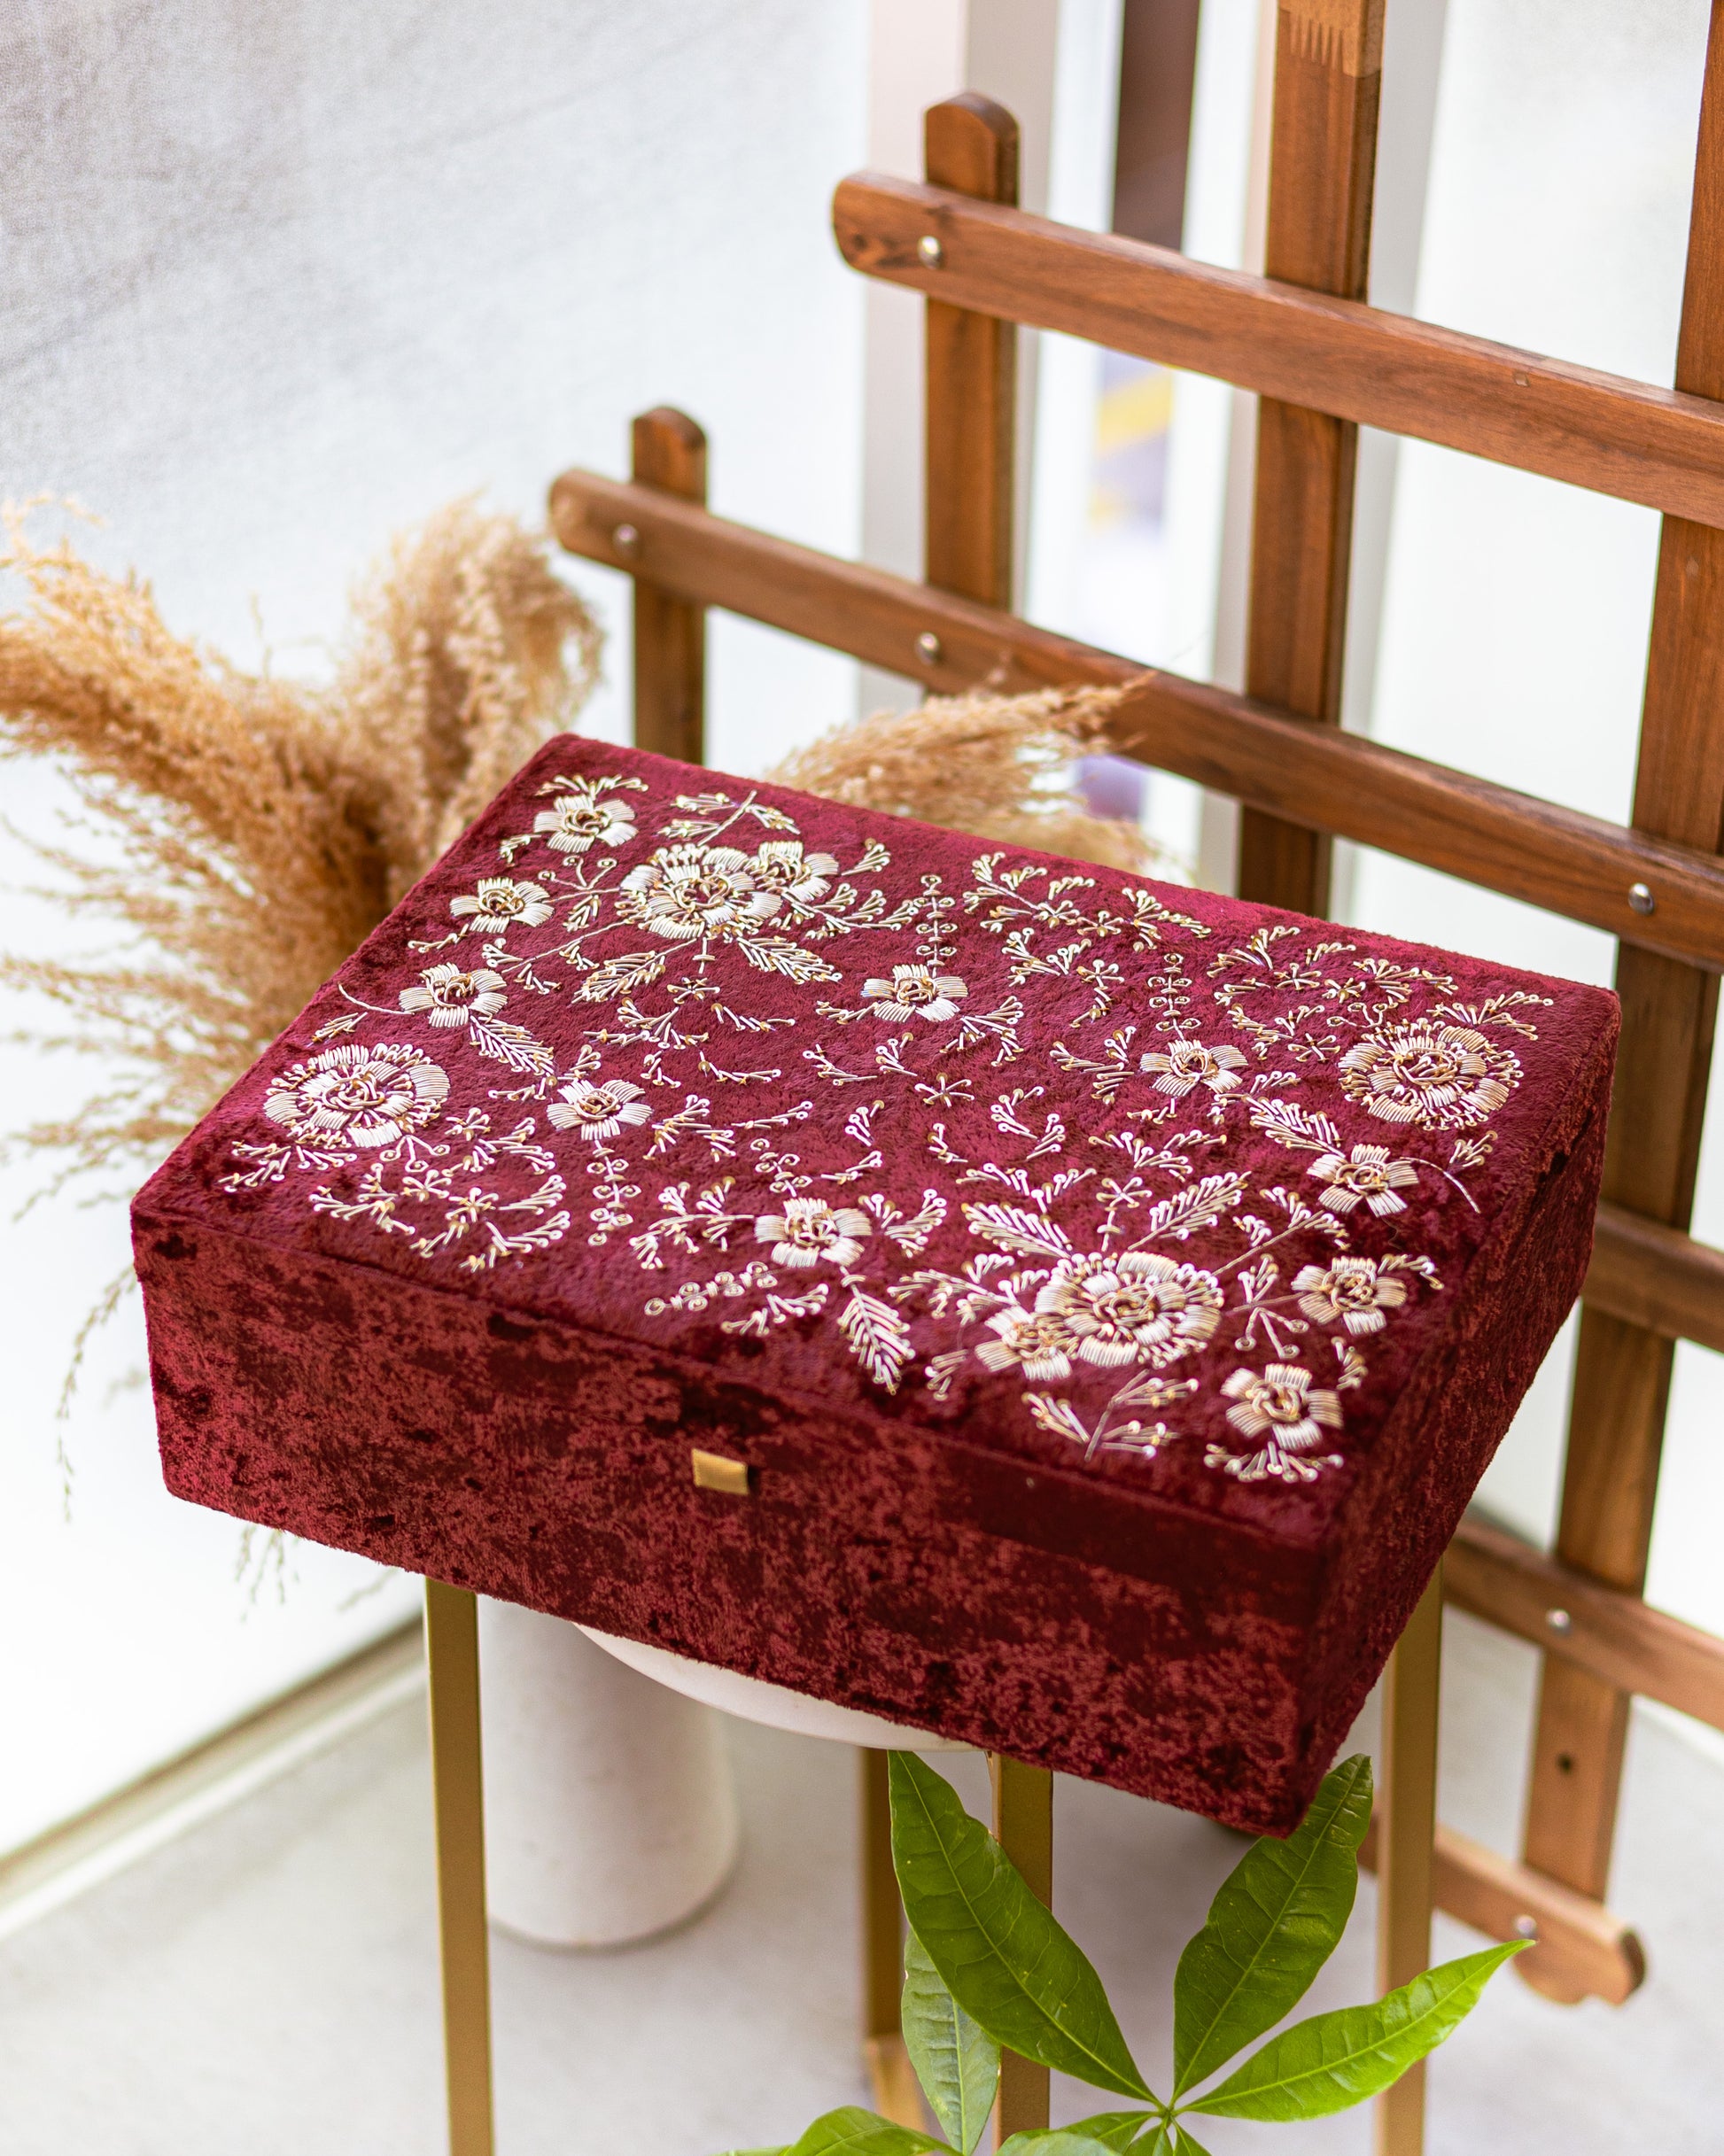 The Art Box Launches Their First Wedding Trousseau Collection